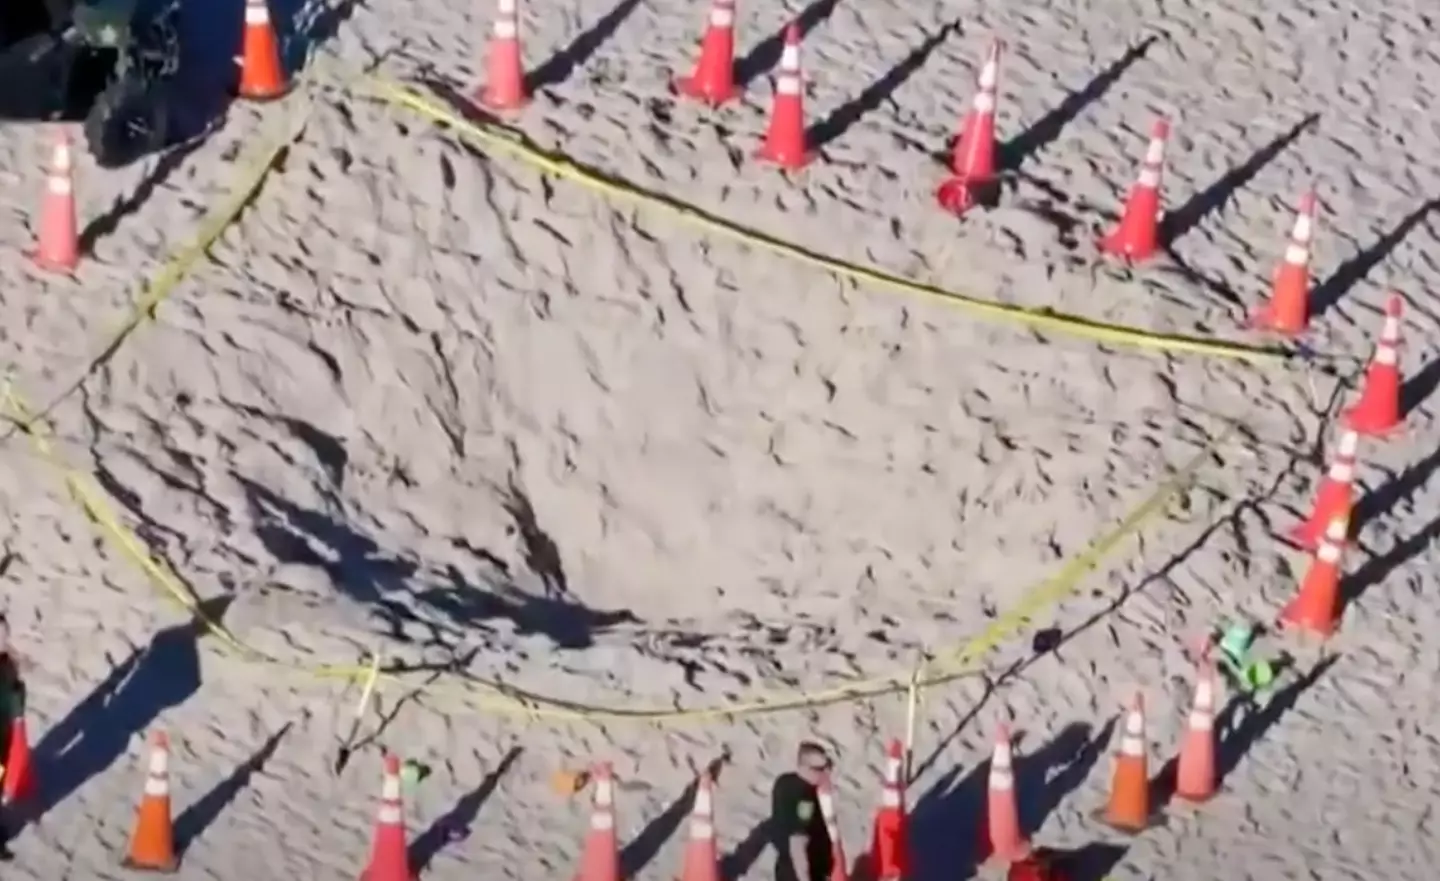 The children reportedly dug a hole measuring about six feet deep.